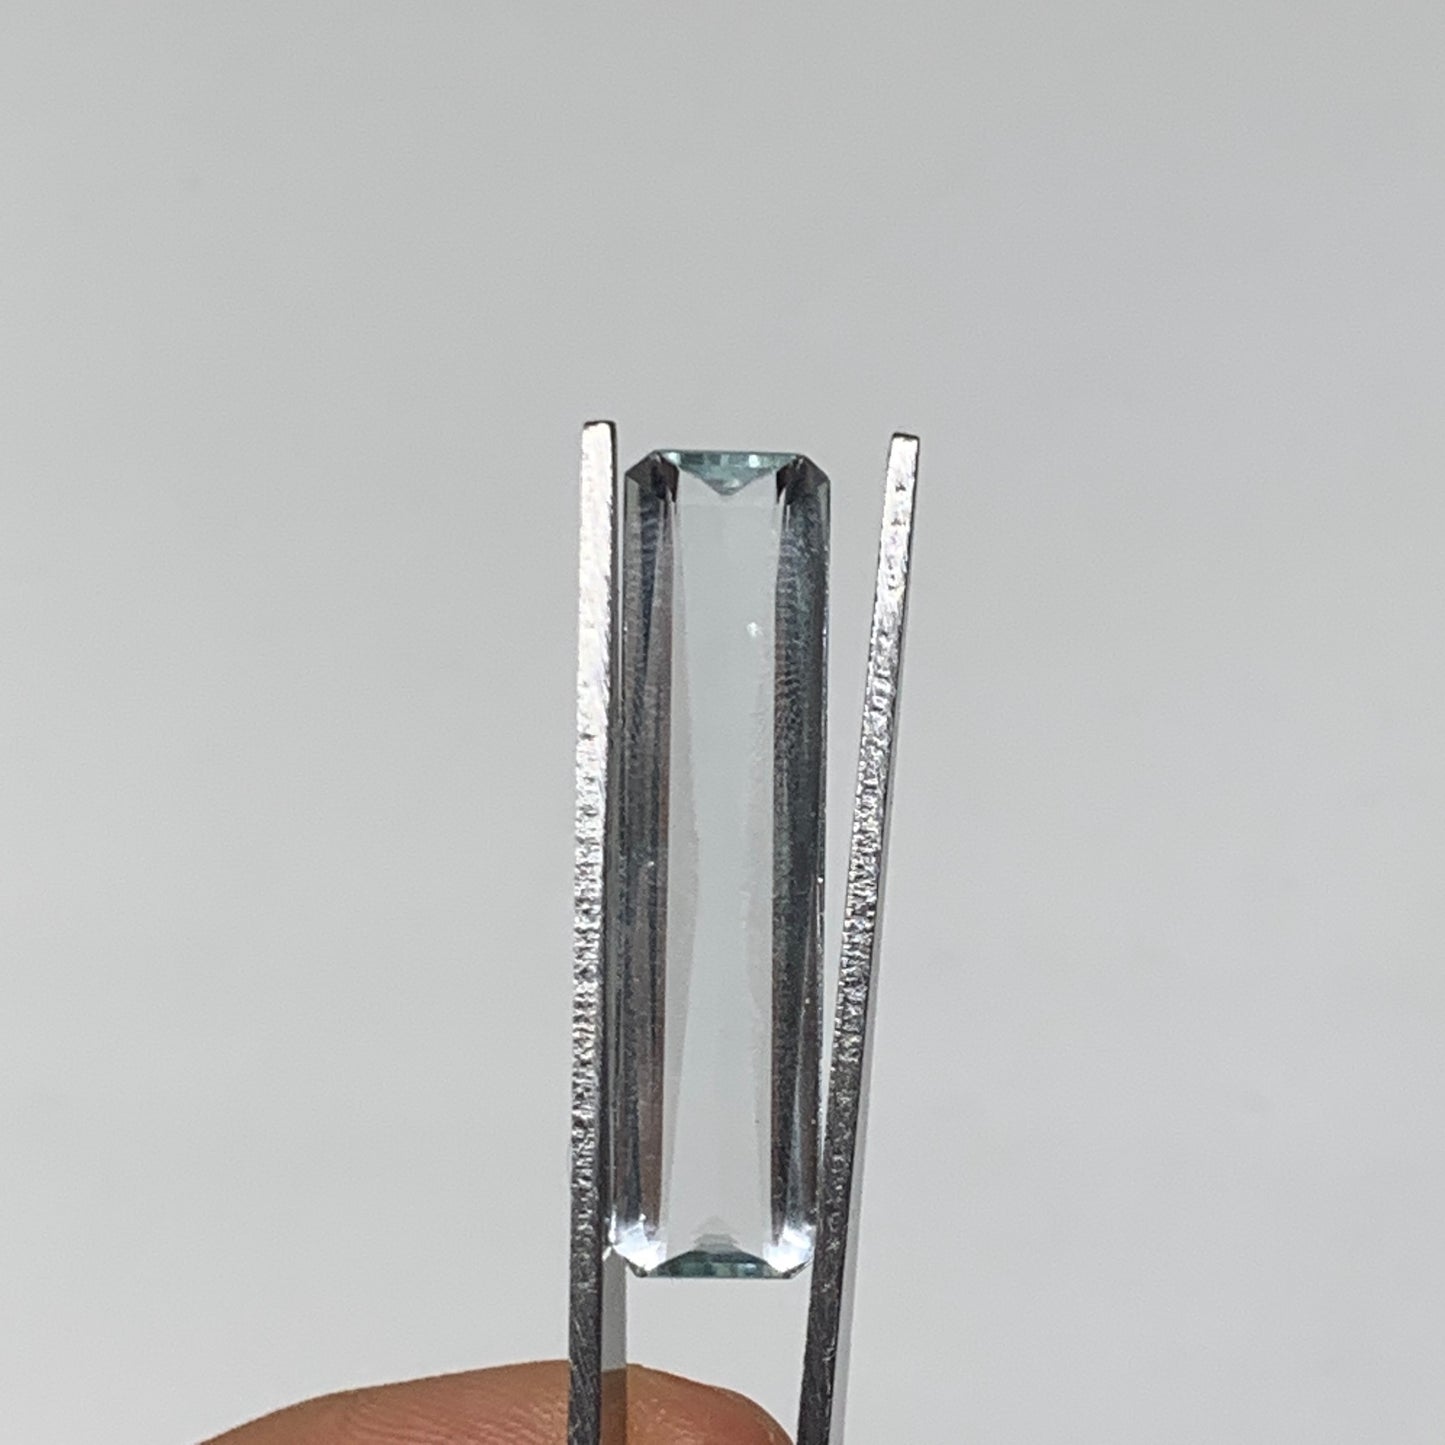 11.67cts, 32mmx8mmx4mm, Aquamarine Crystal Facetted Stone Loose @Pakistan,CTS115